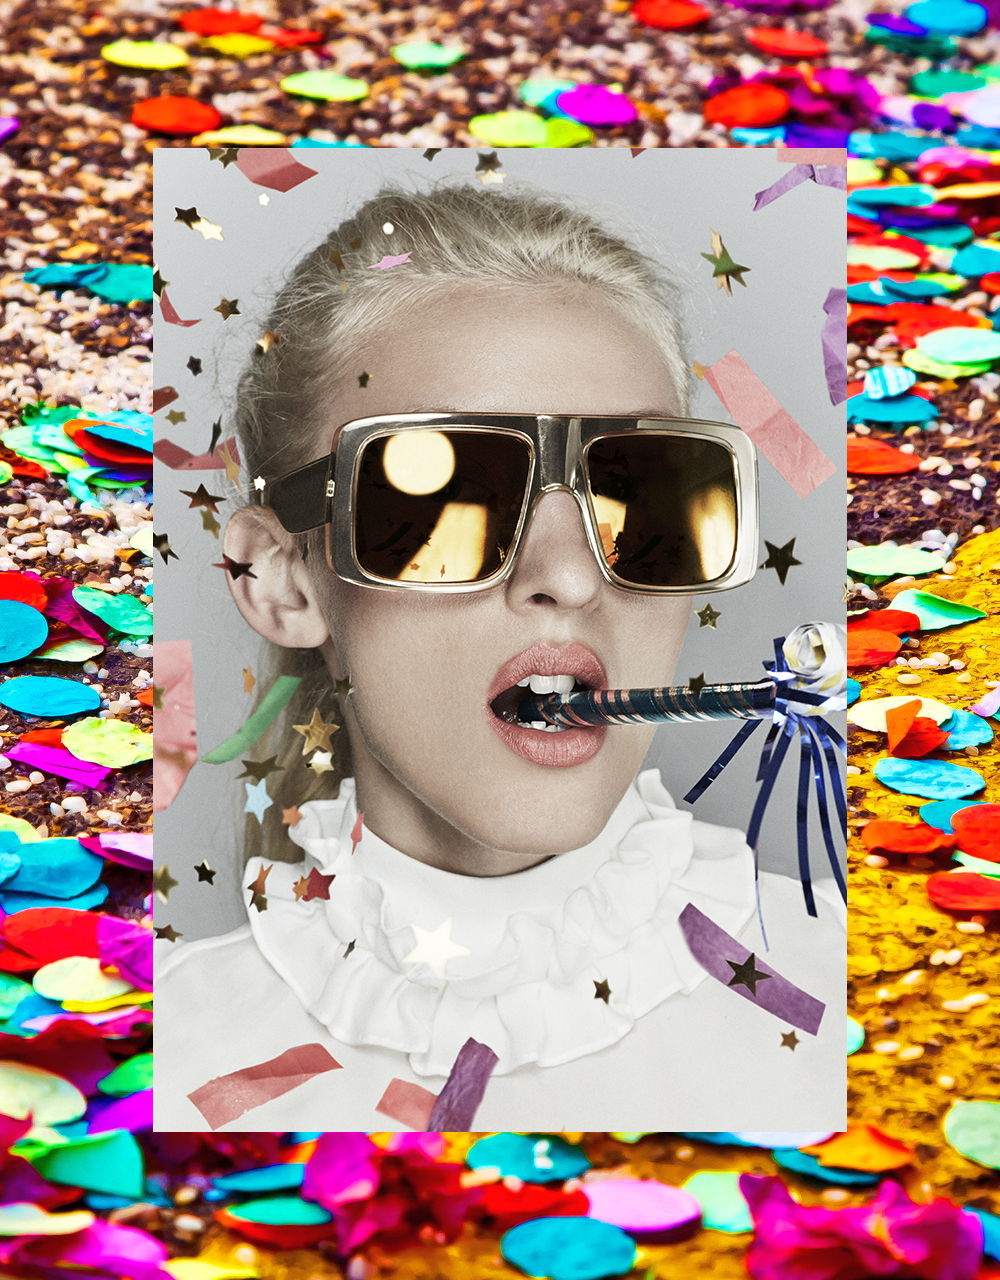 BY CHILL NEWS Karen Walker Eyewear Celebrates ten years with 10 years of making funny faces campaign